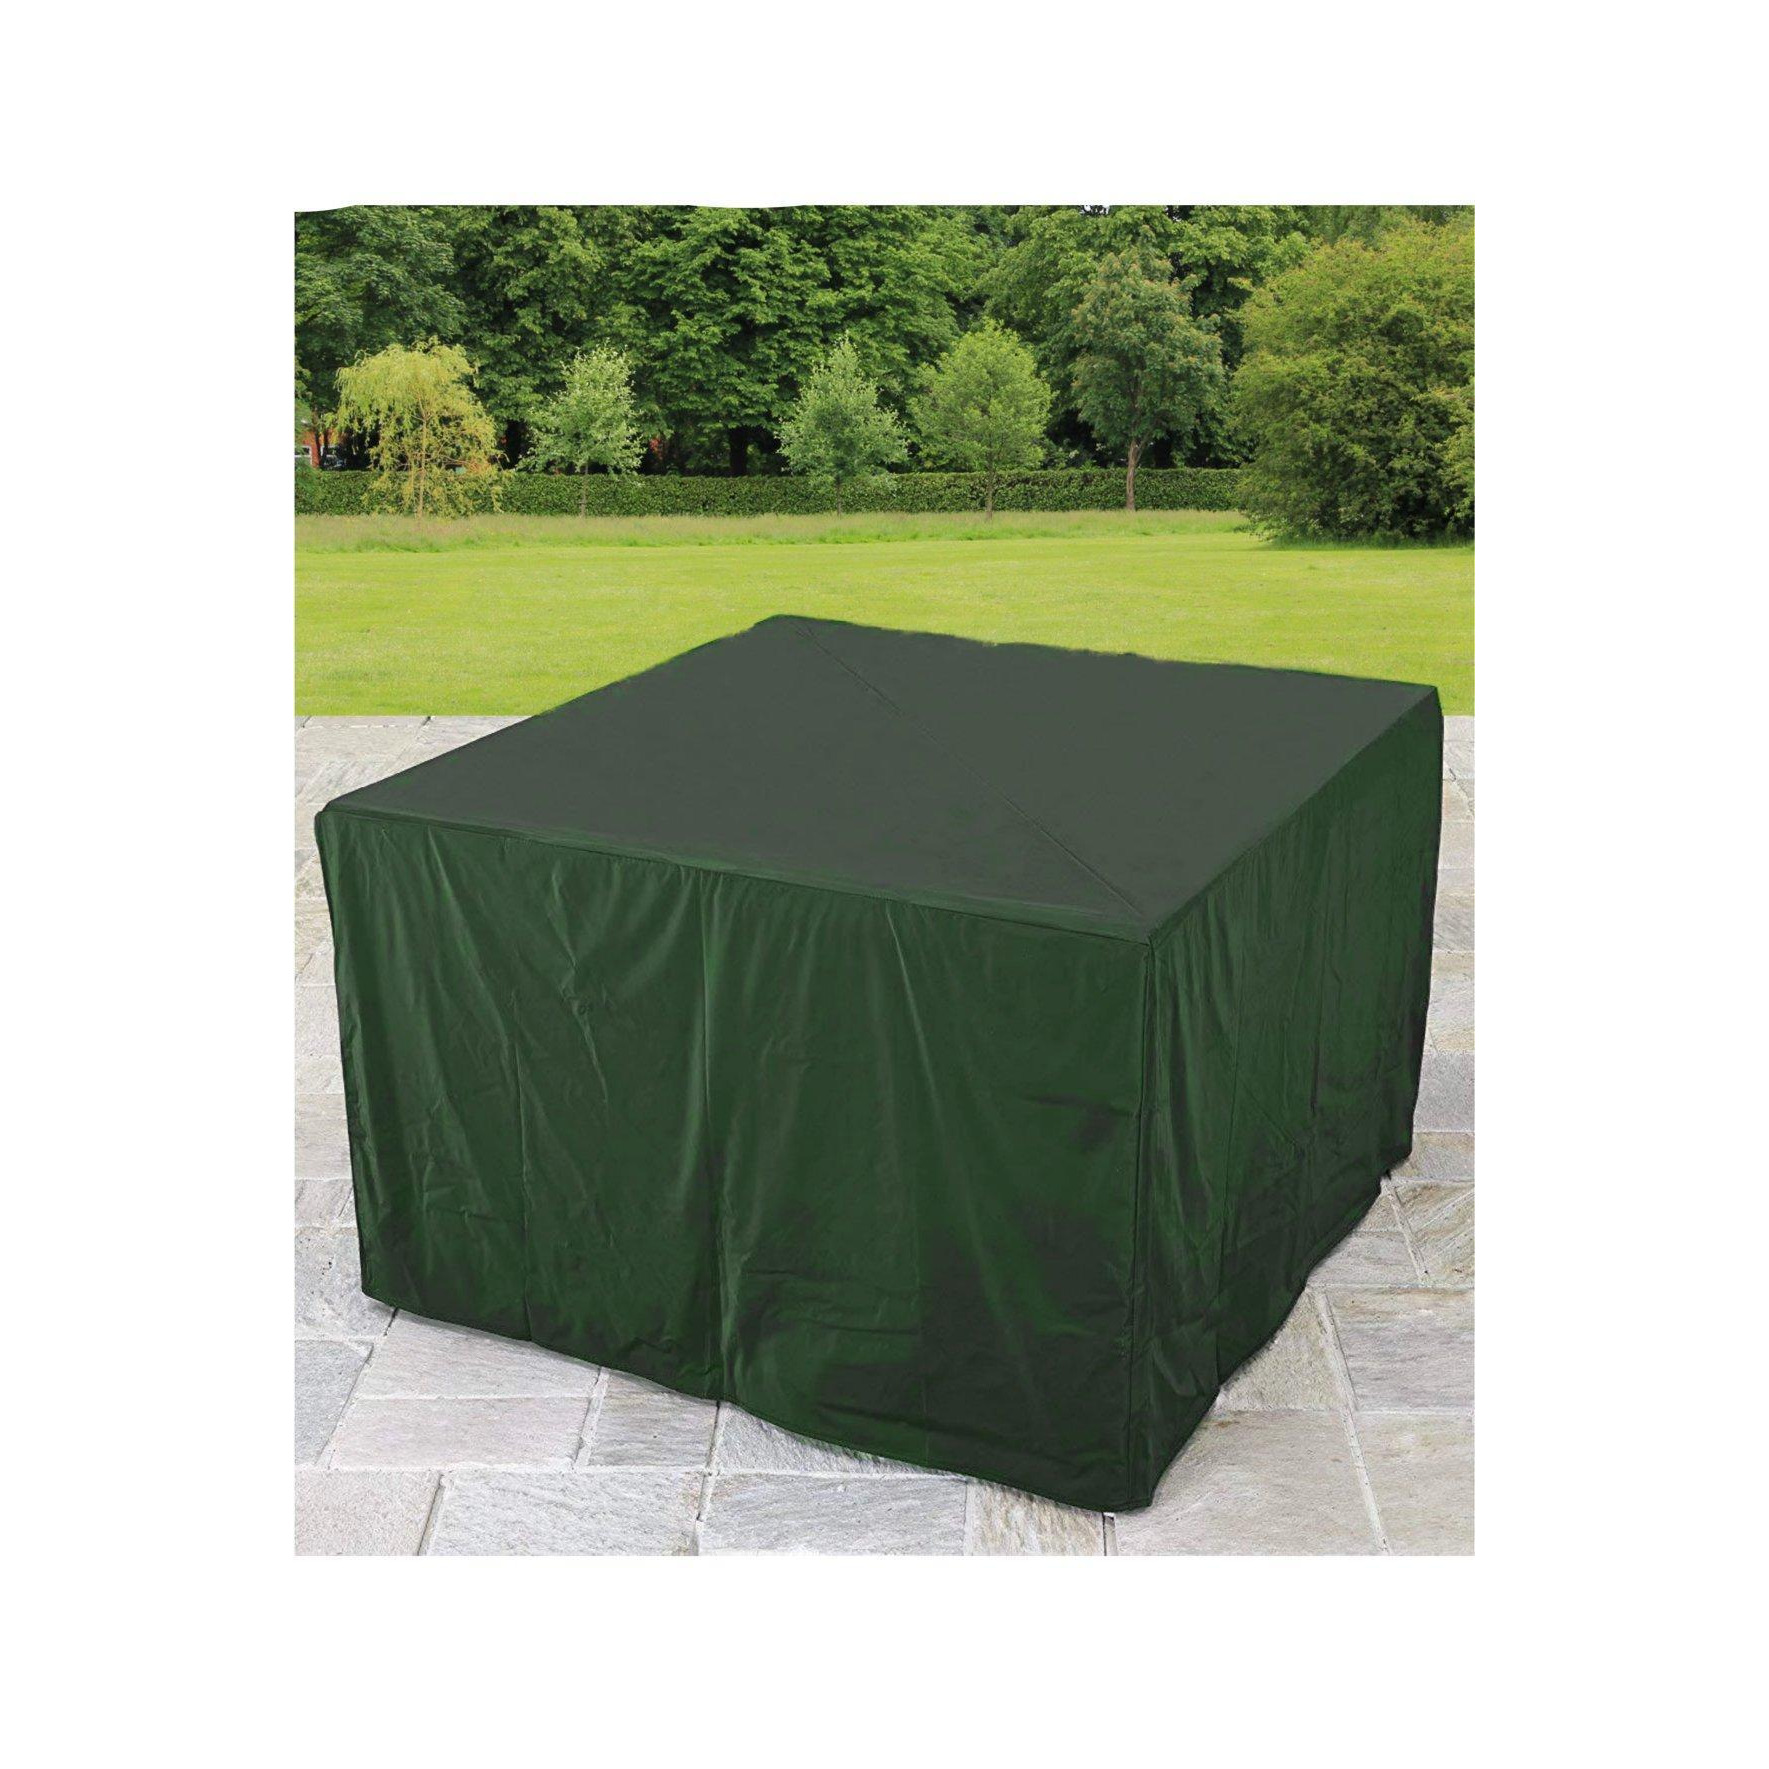 Square Waterproof Garden Furniture cover - image 1